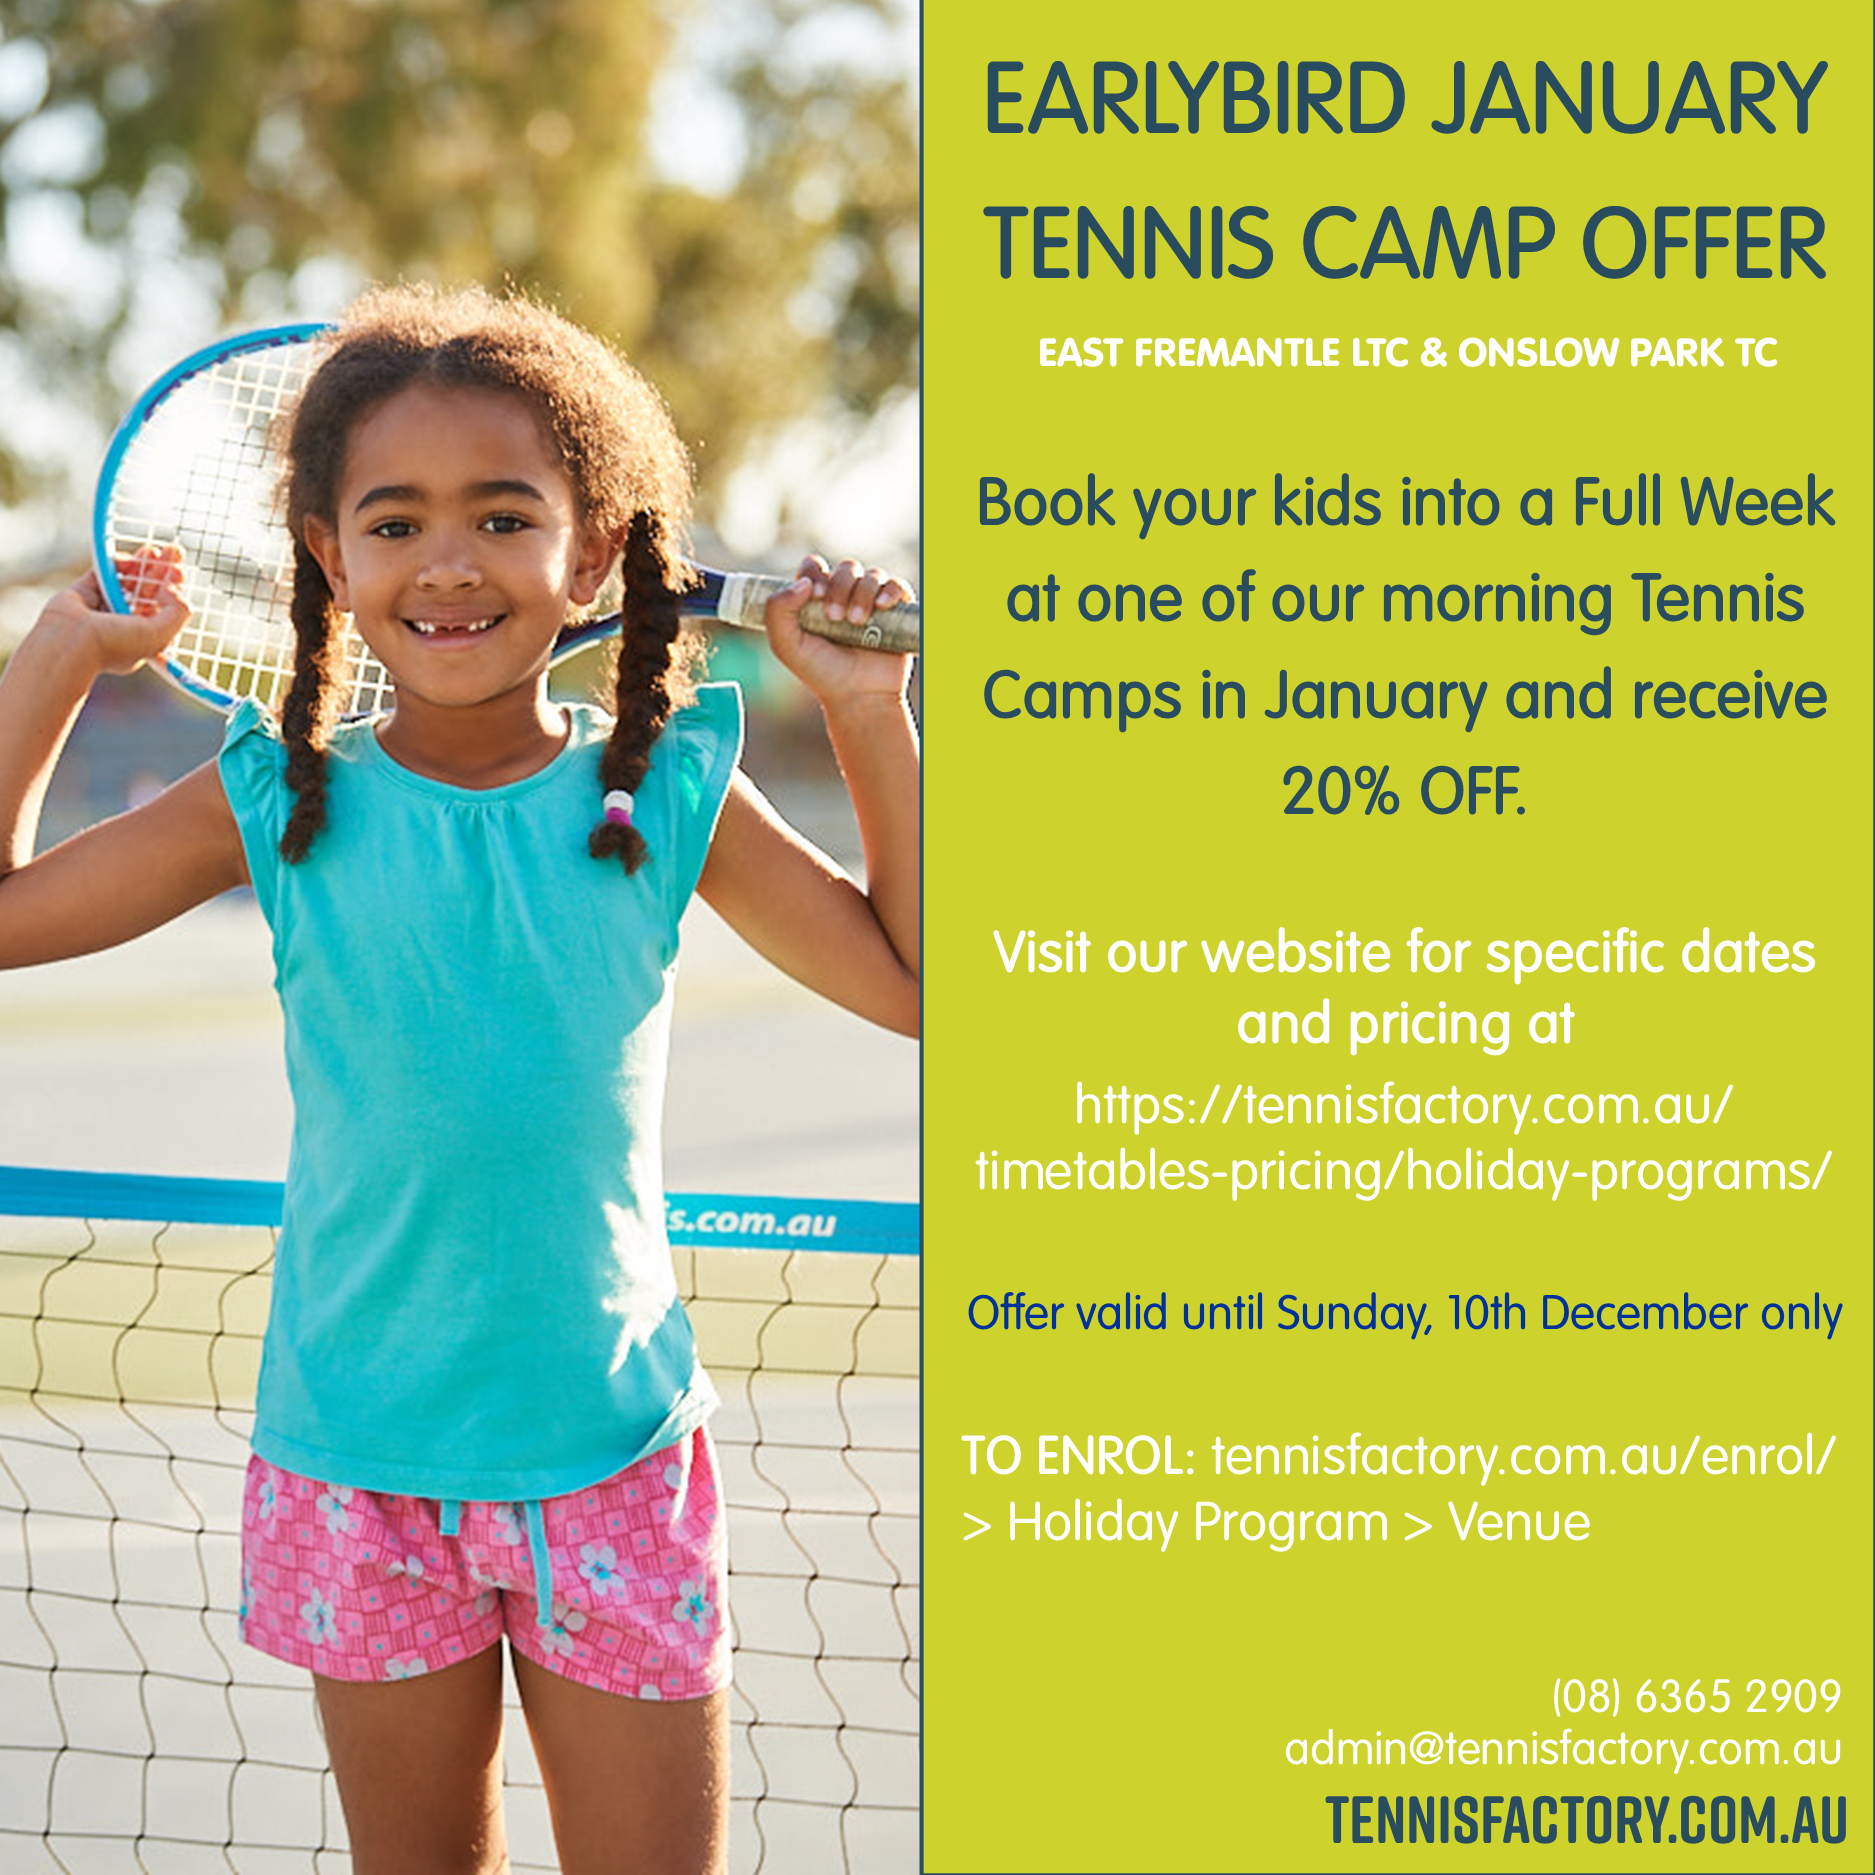 EARLYBIRD JANUARY TENNIS CAMP SPECIAL OFFER!